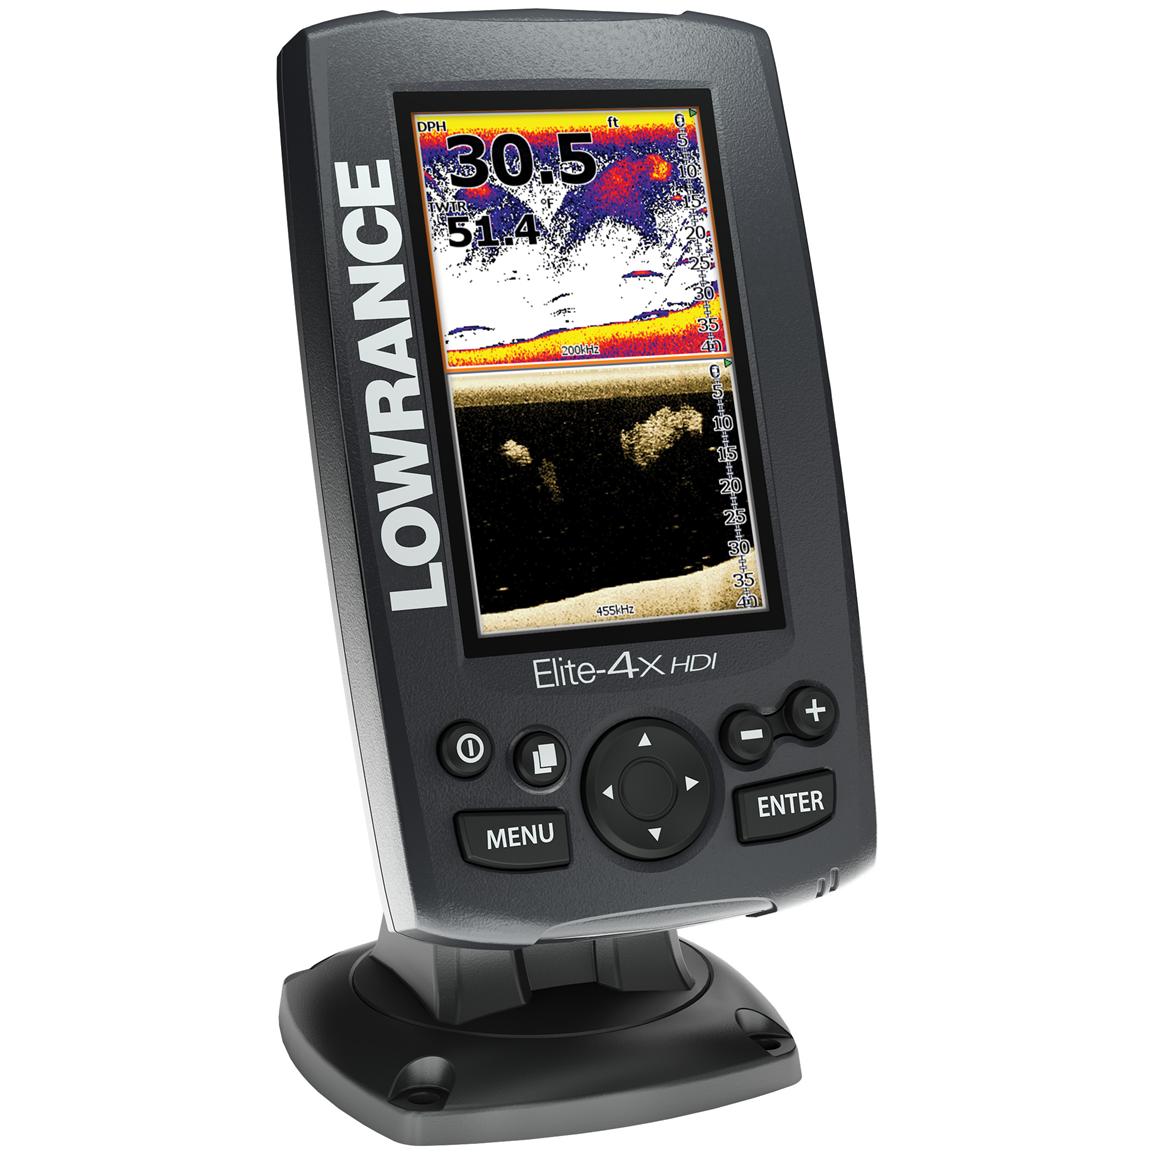 Lowrance Elite-4x HDI Fishfinder with 83/200kHz and 455/800kHz